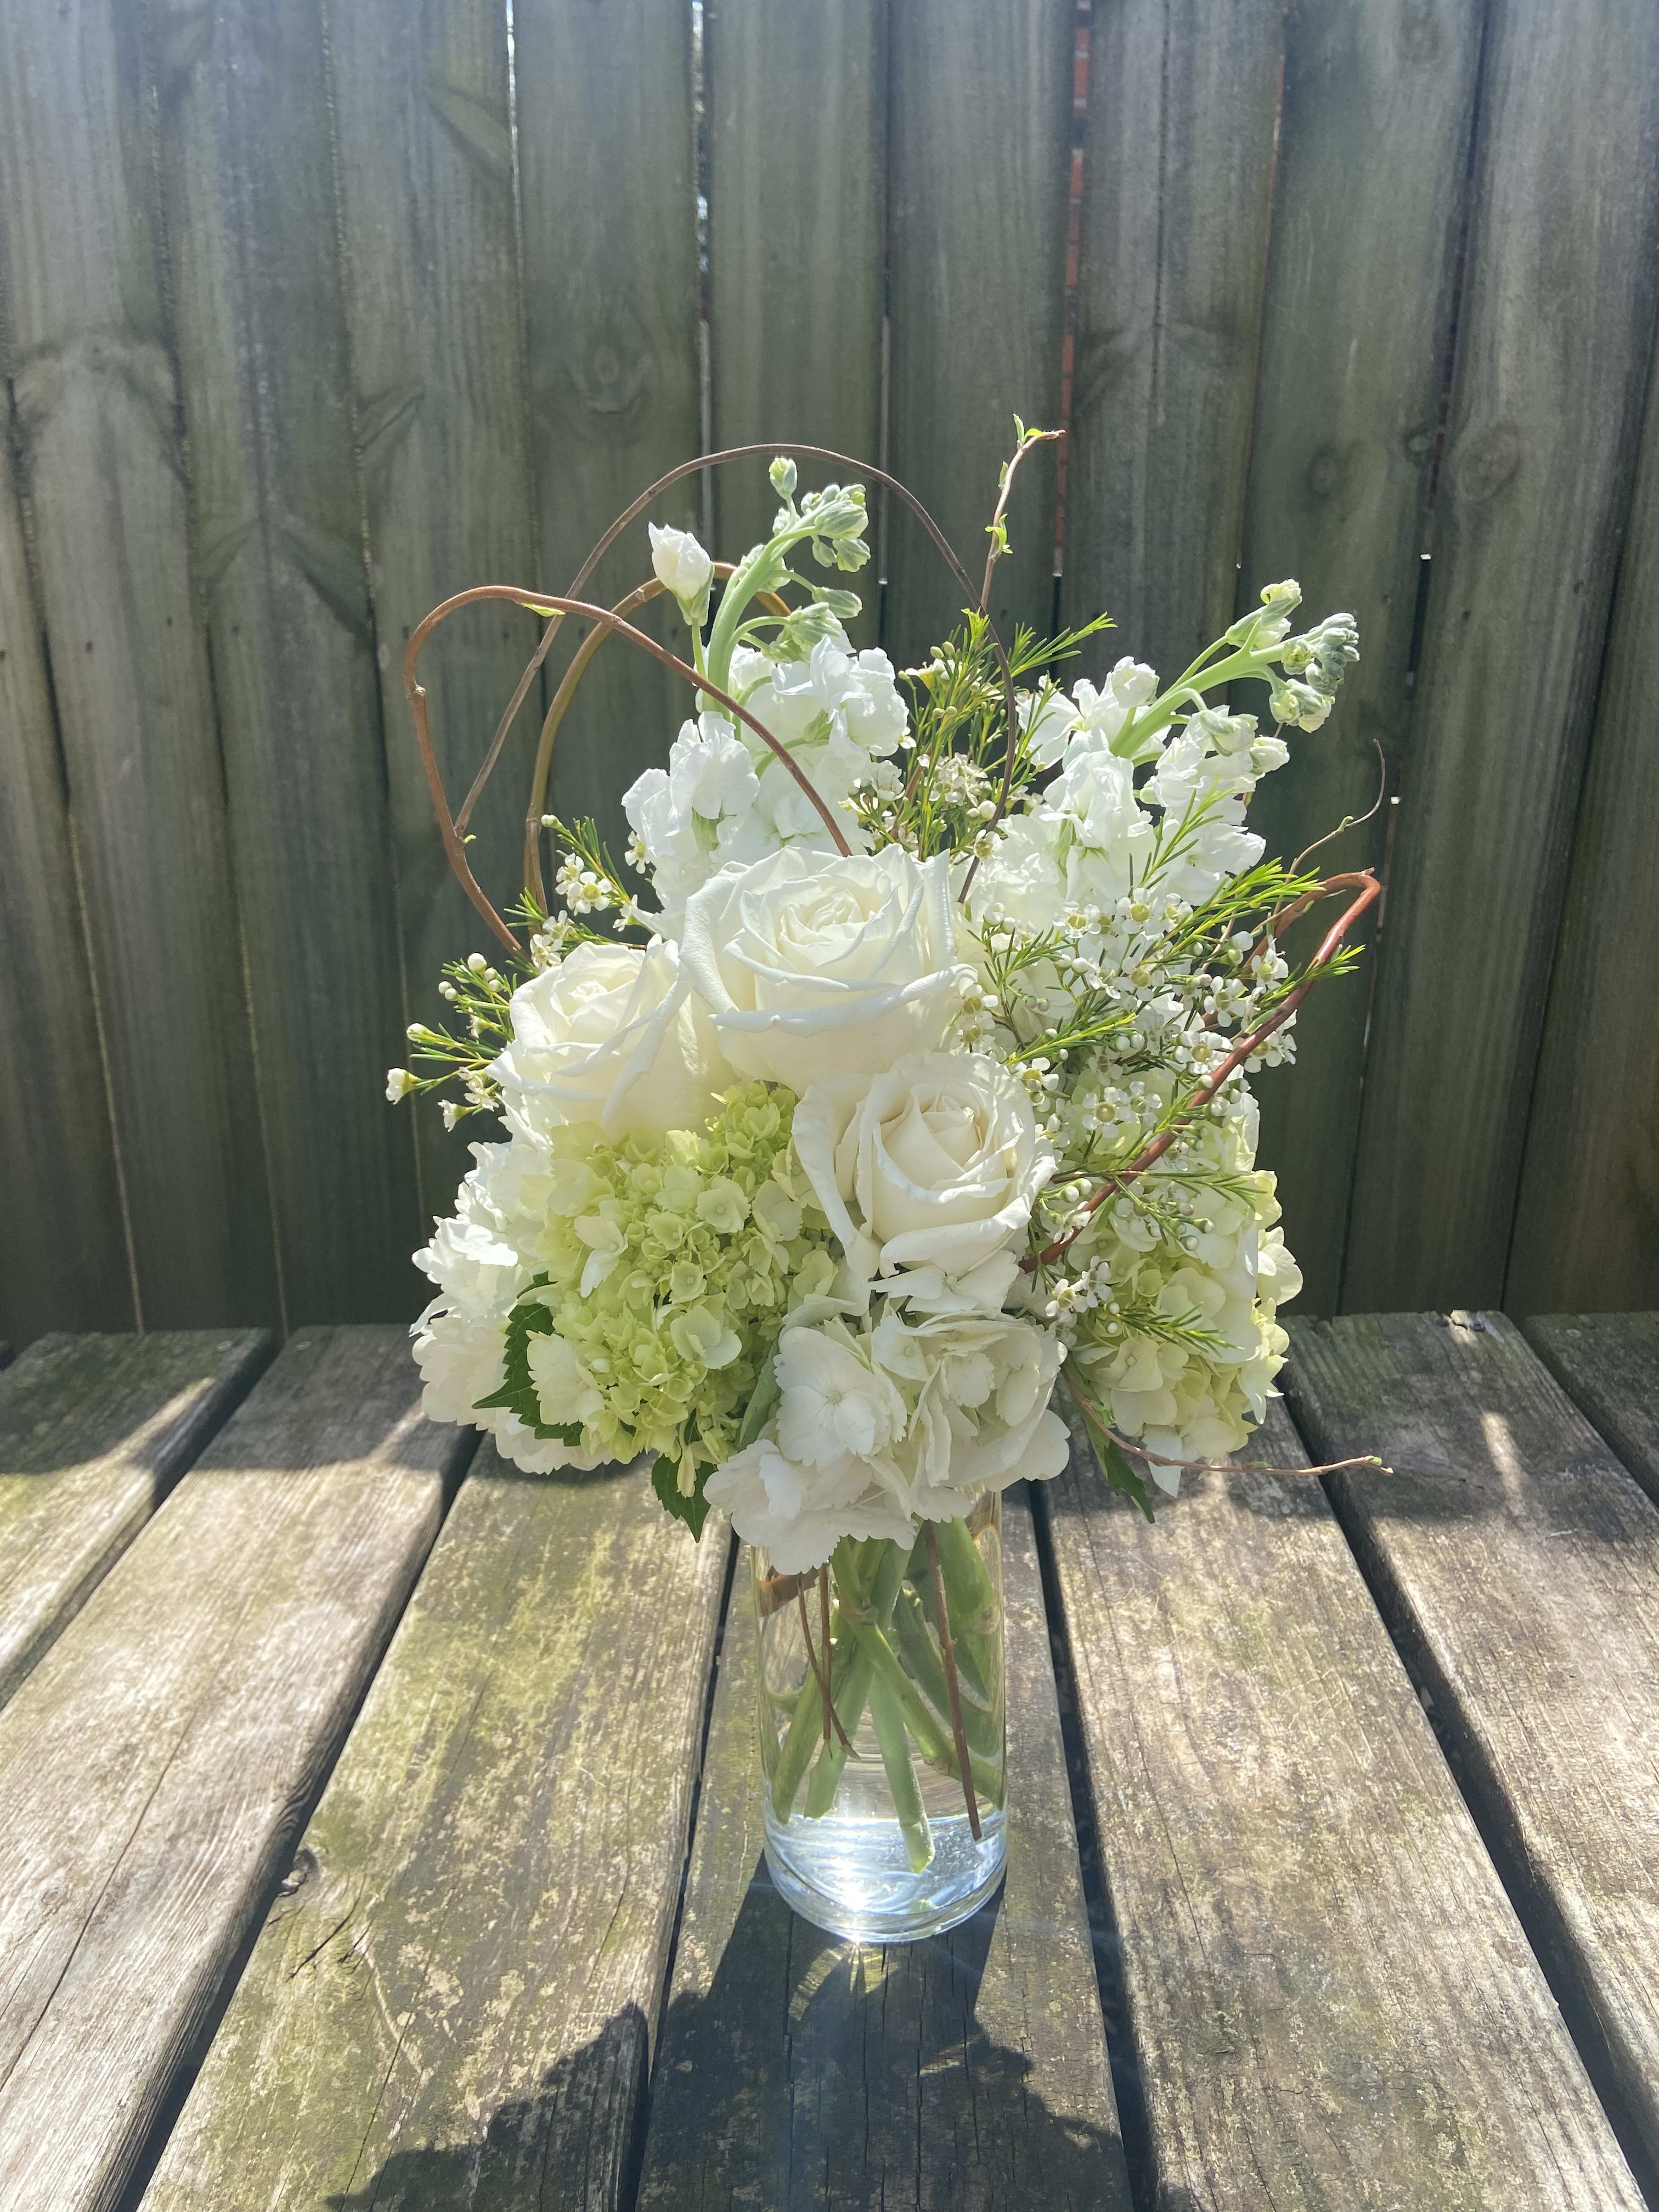 Daydream Blooms - White and green hydrangeas, white roses, accent flowers and curly willow in a cylindrical vase.